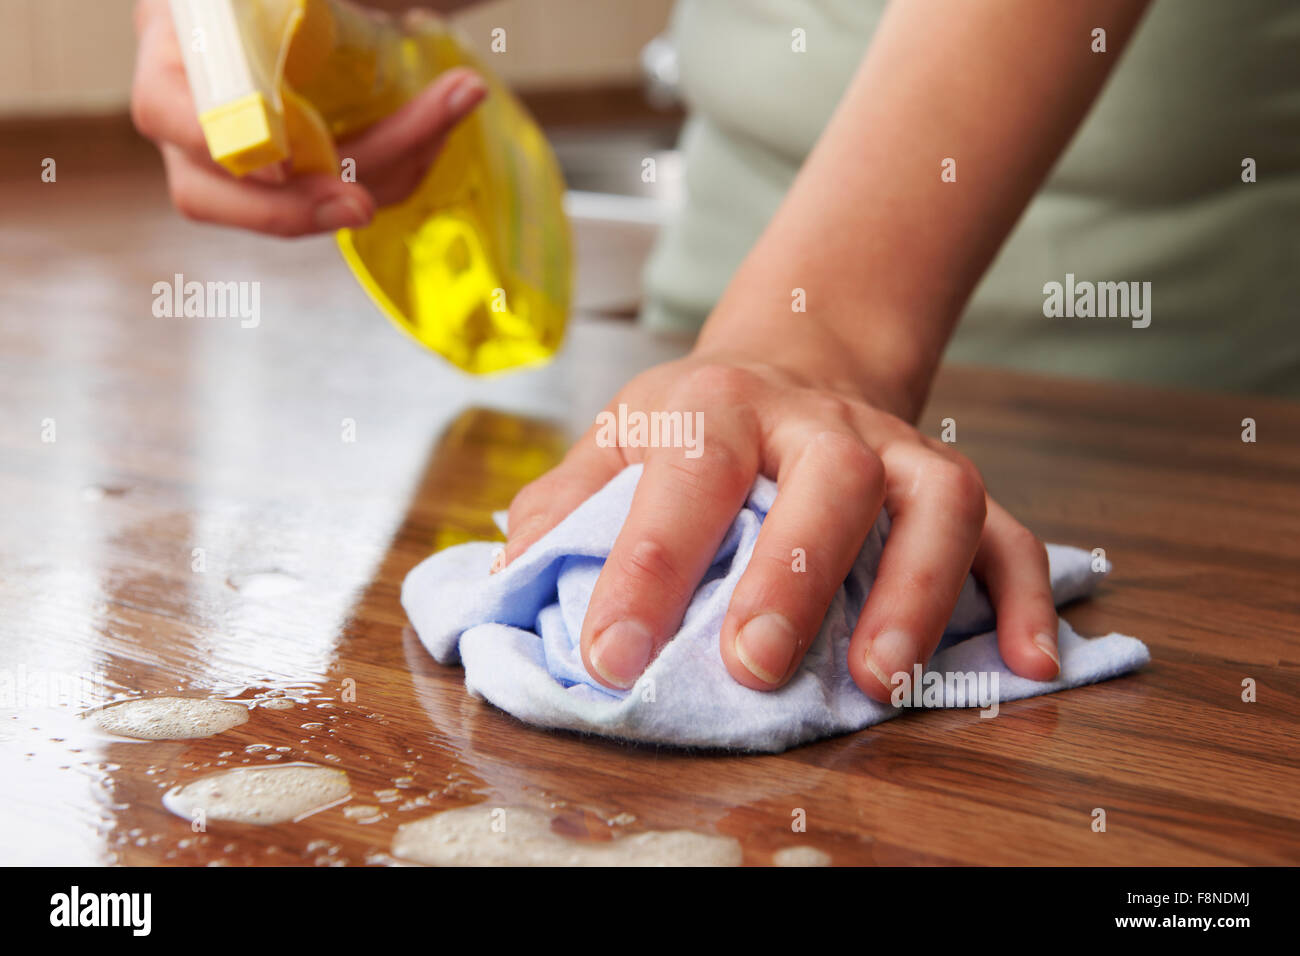 Woman Using Spray Cleaner On Wooden Surface Stock Photo